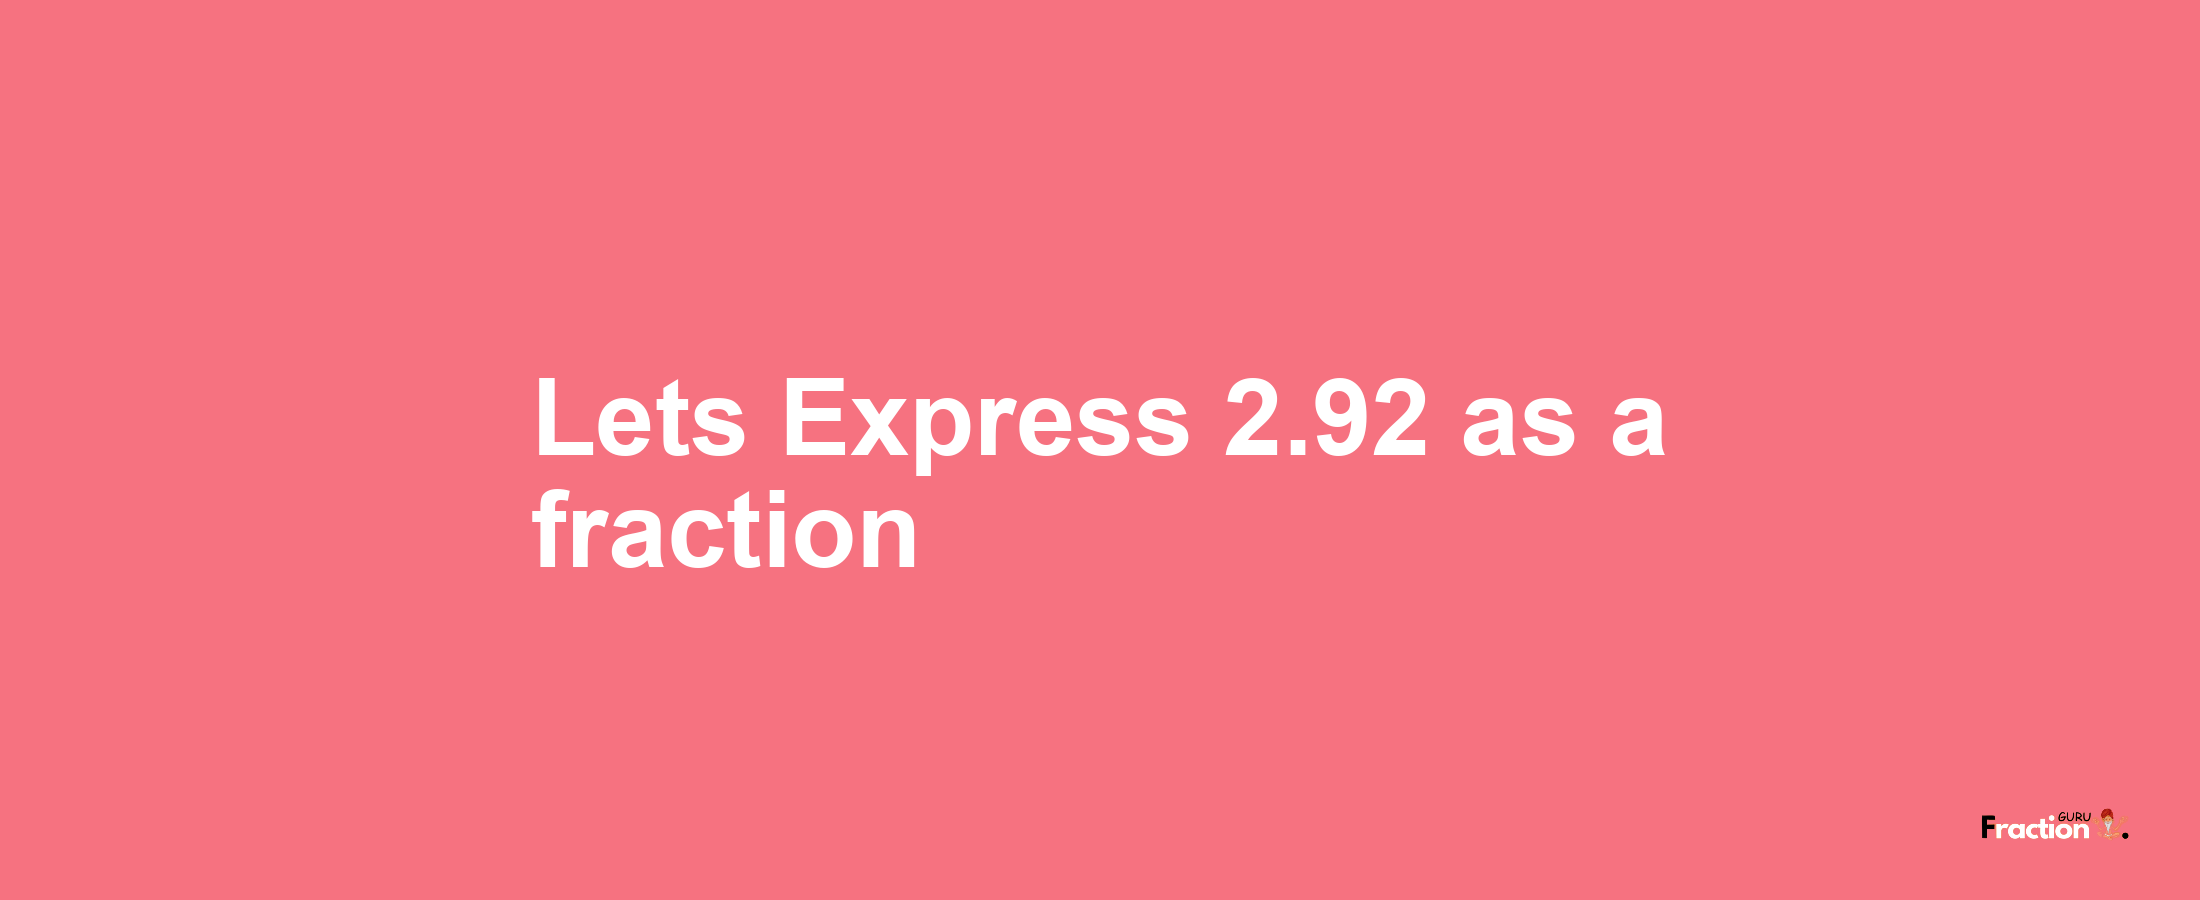 Lets Express 2.92 as afraction